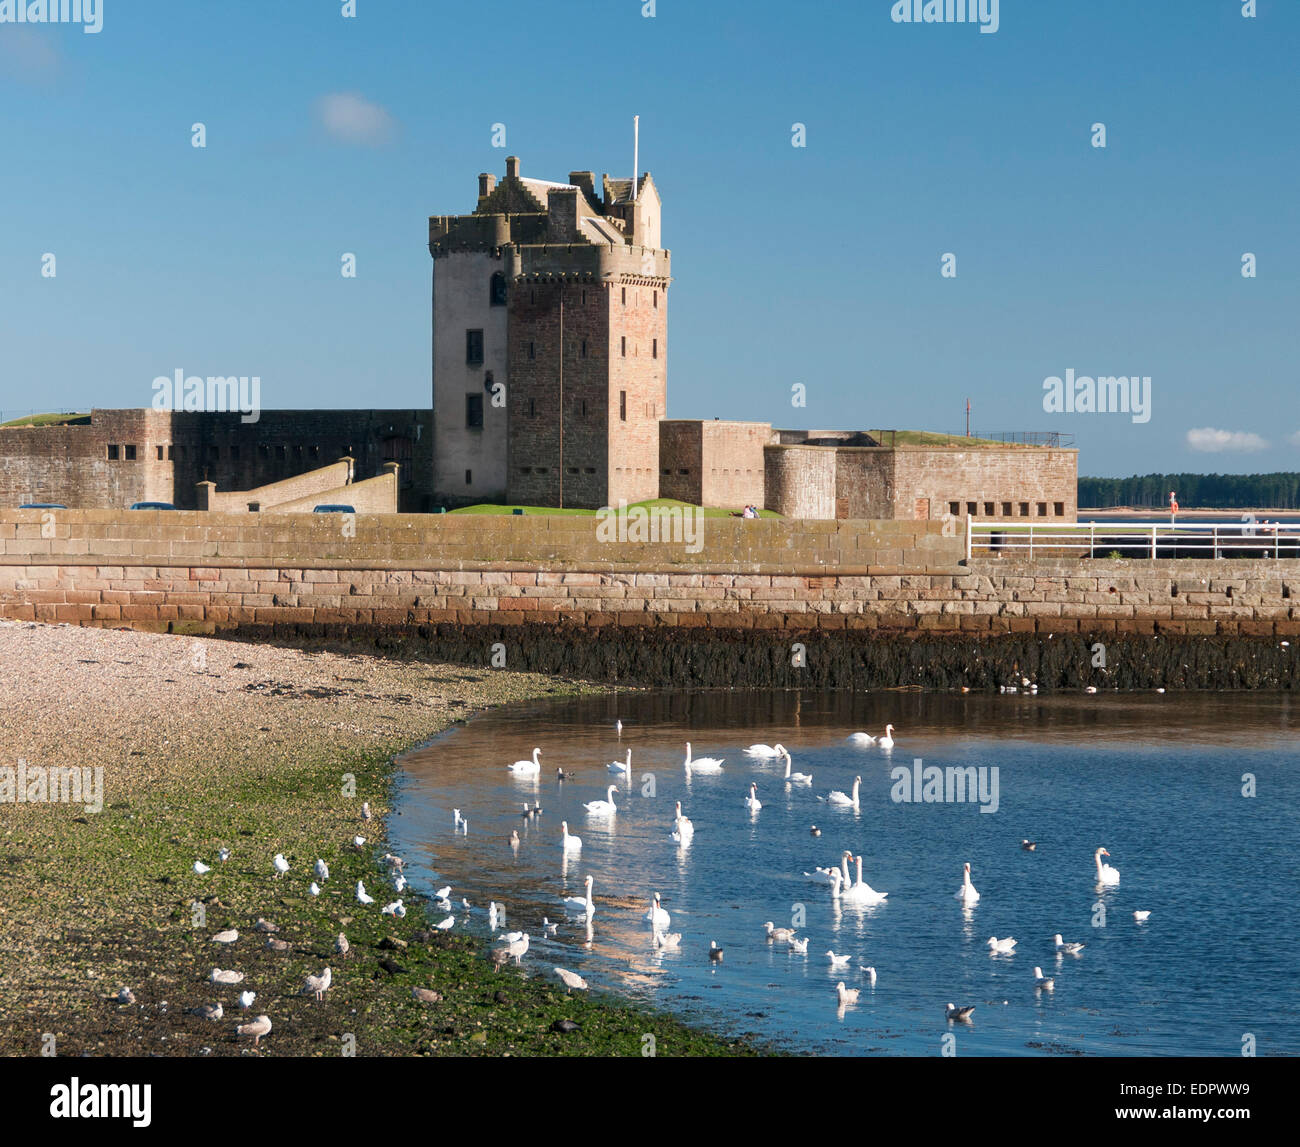 broughty ferry castle dundee with swans Stock Photo